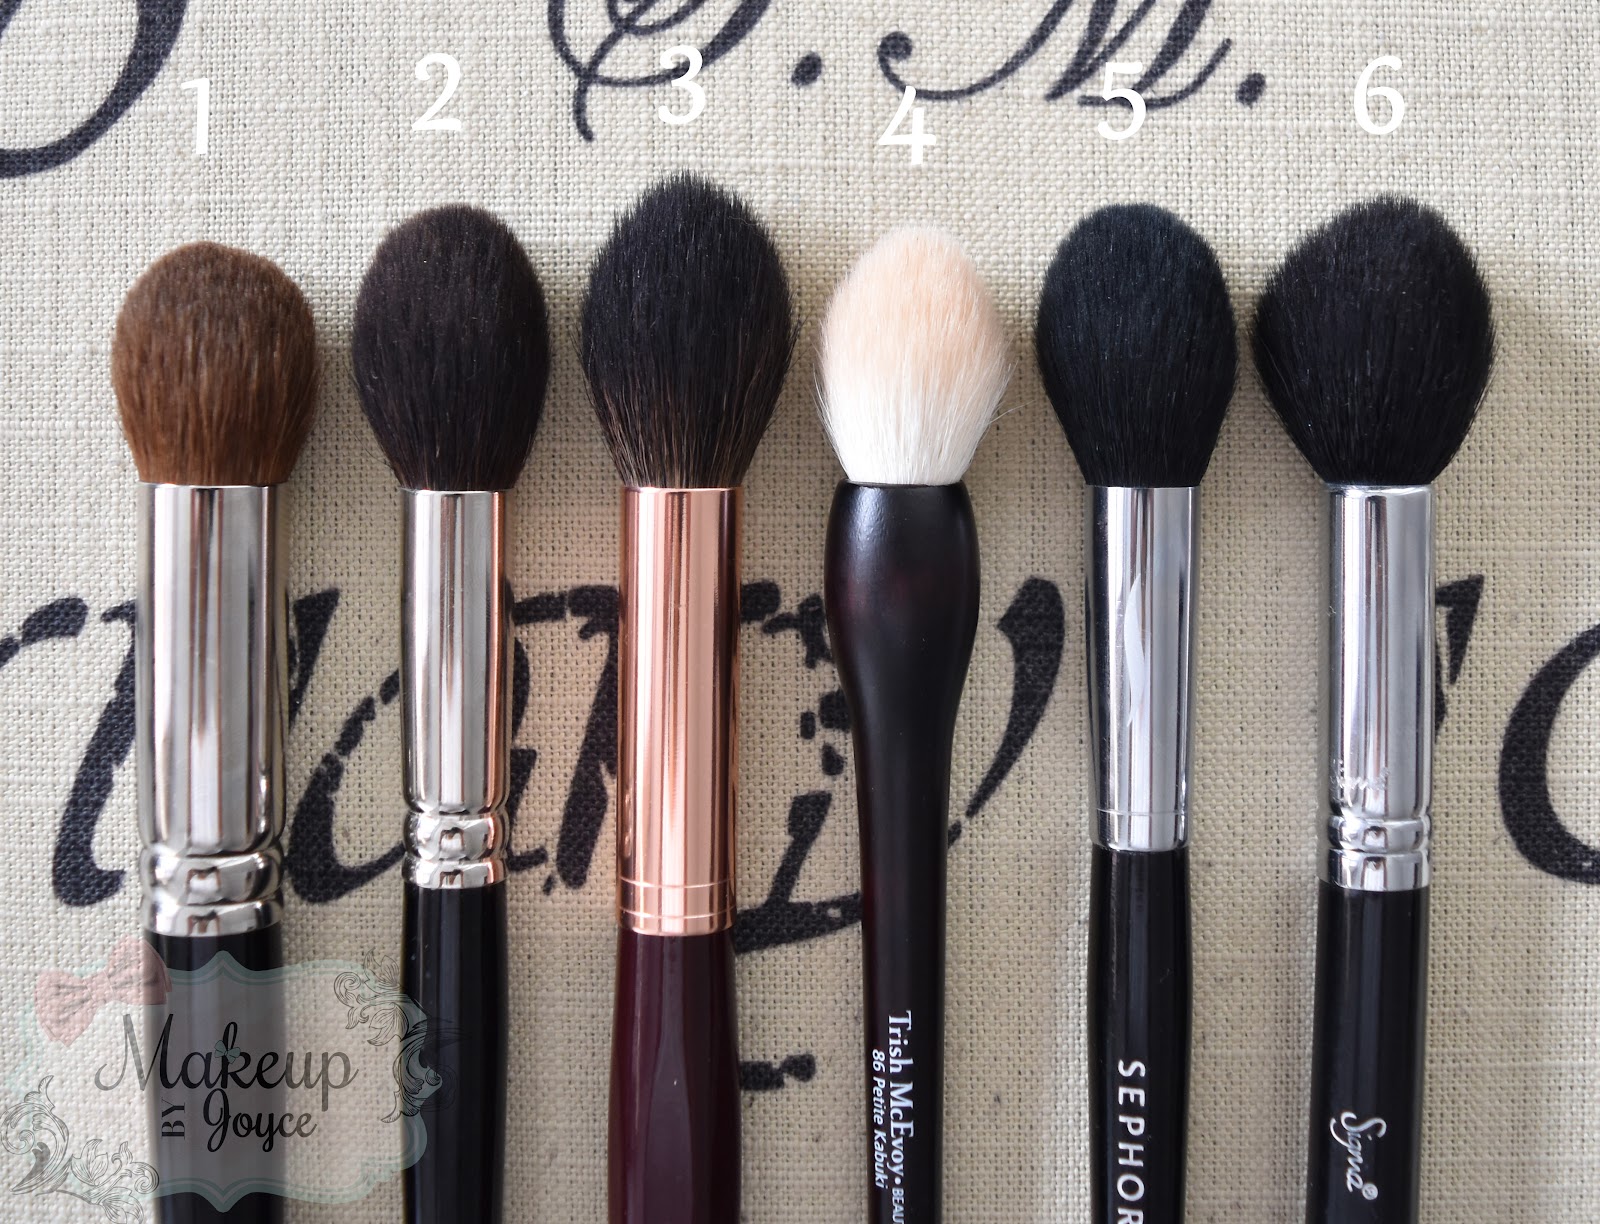 Brushes For Contouring